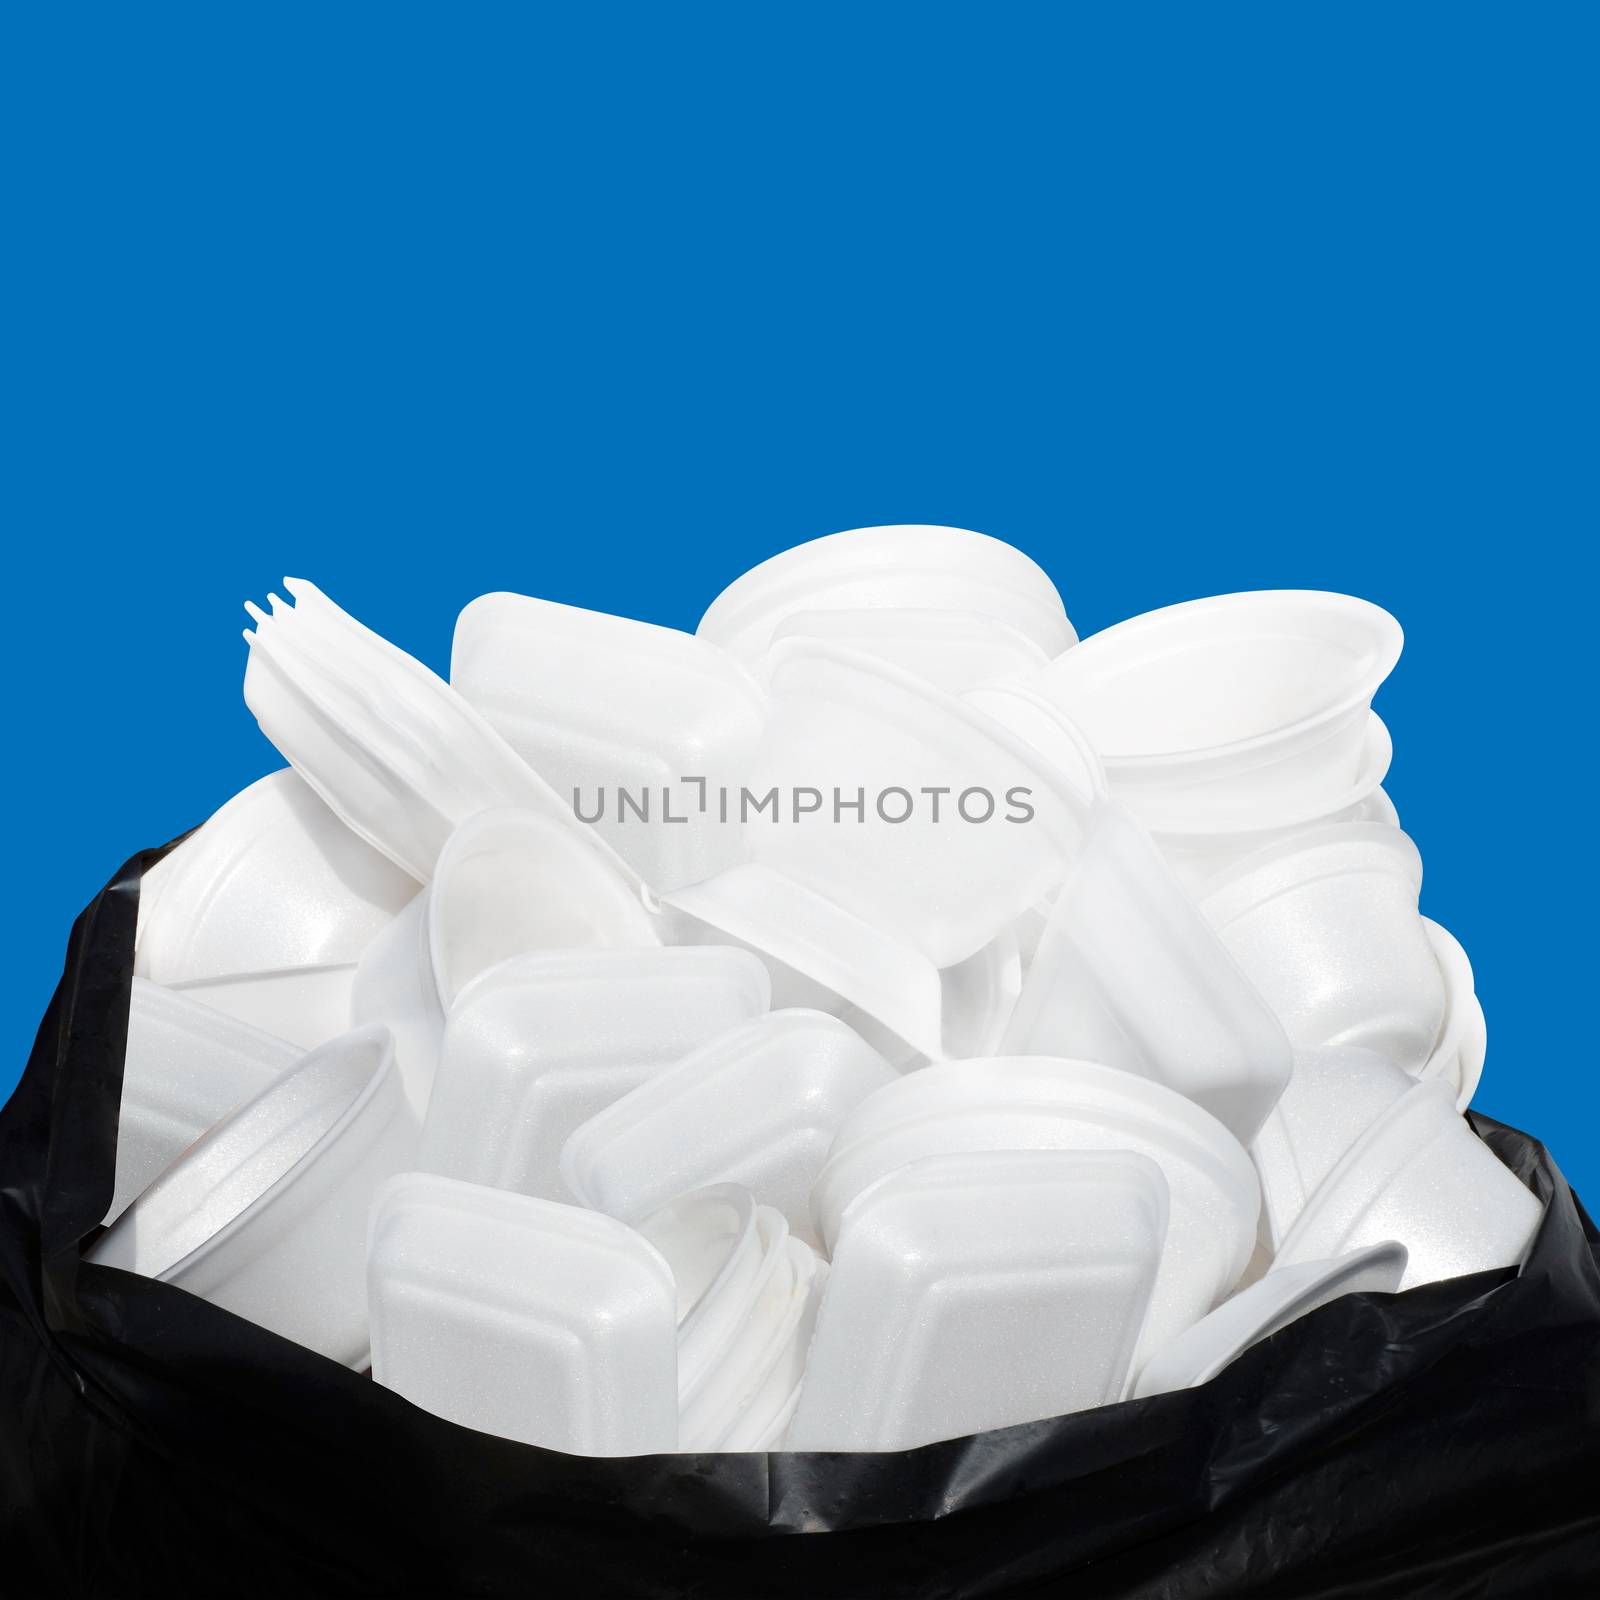 Waste Garbage foam food tray white many pile on the plastic black bag dirty isolated on blue background, Bin, Trash, Recycle, foam trays garbage isolated on blue background by cgdeaw